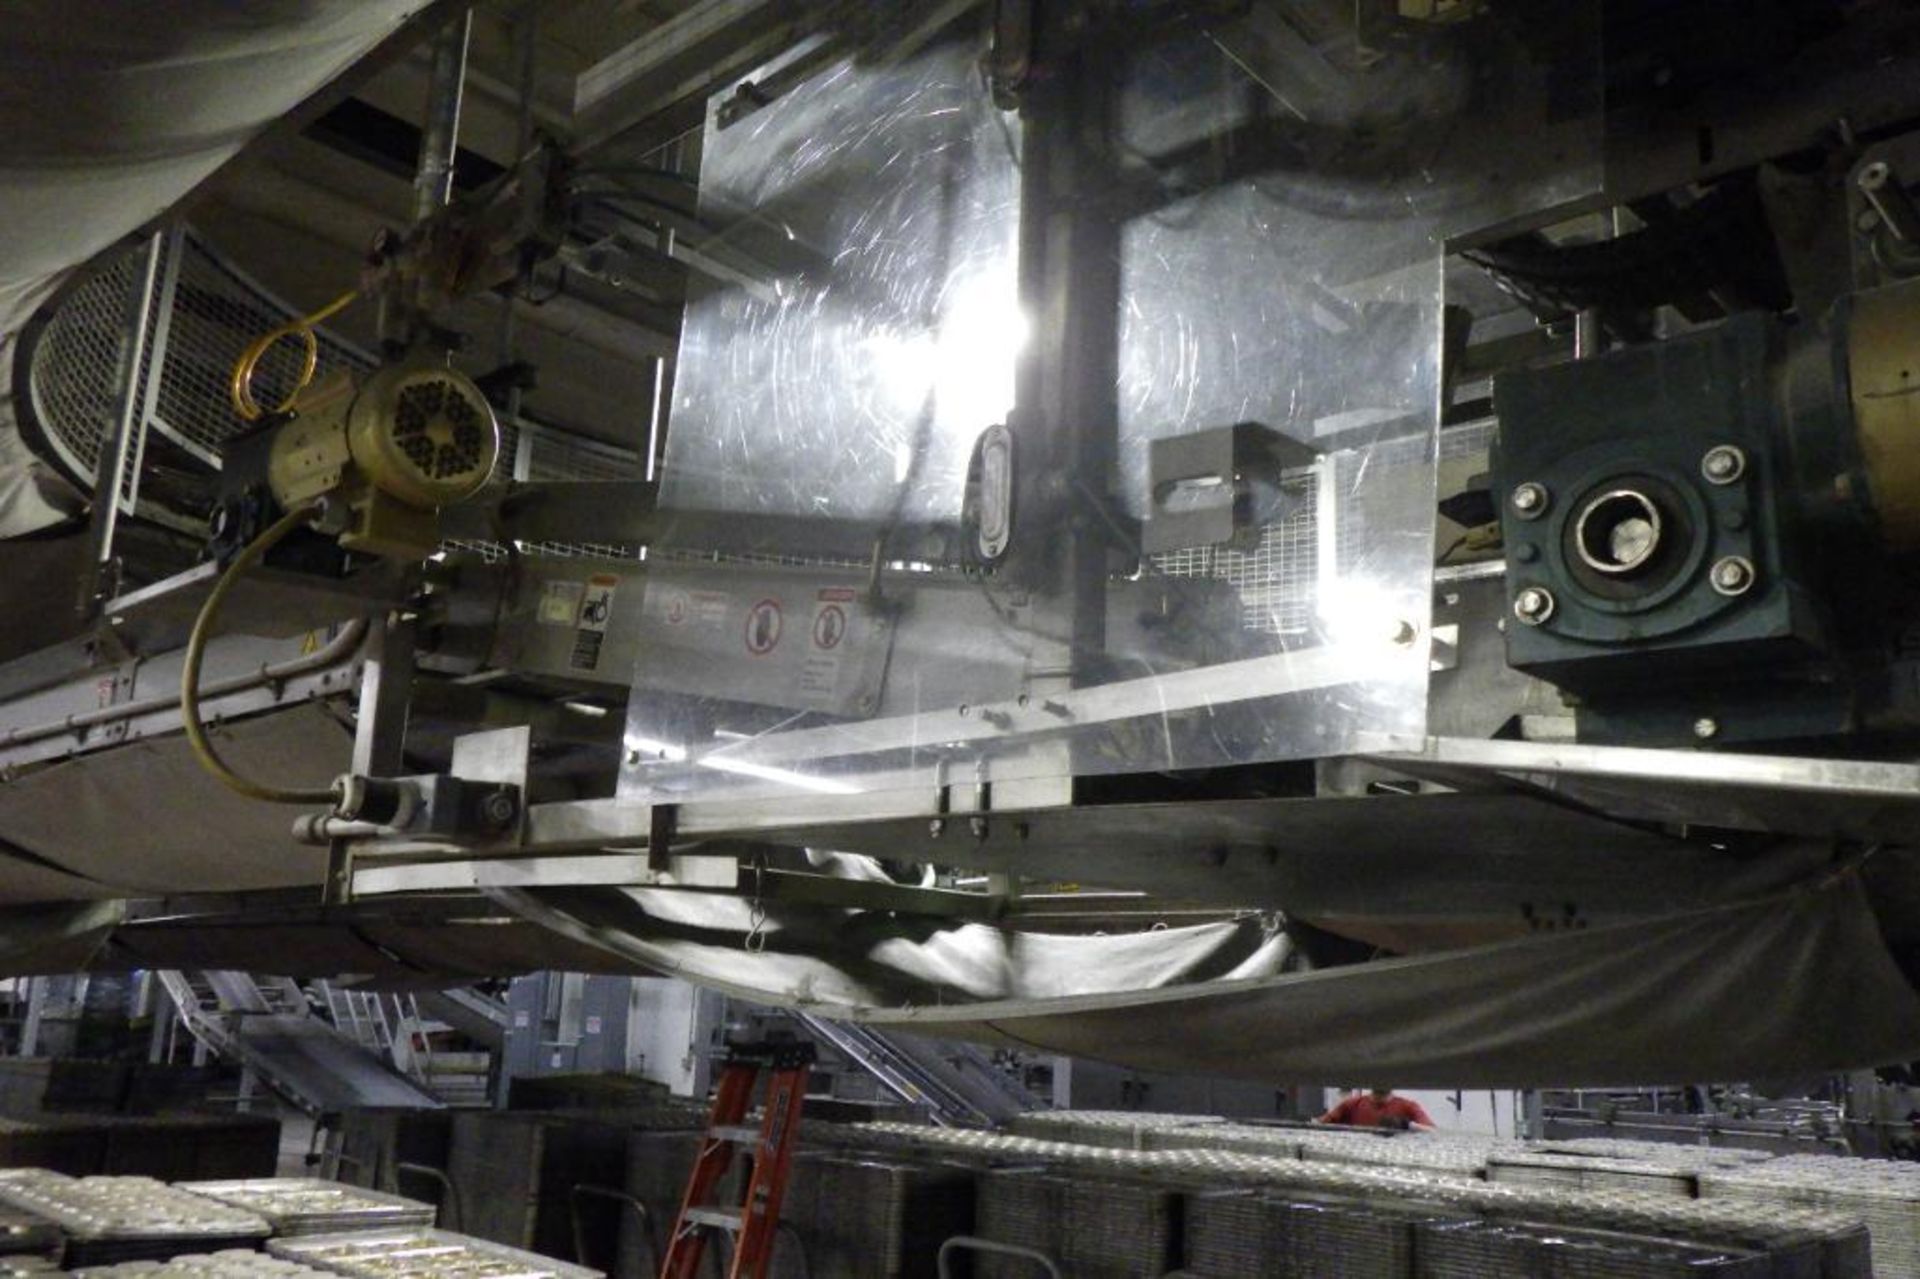 Stewart systems empty pan conveyor - Image 6 of 27